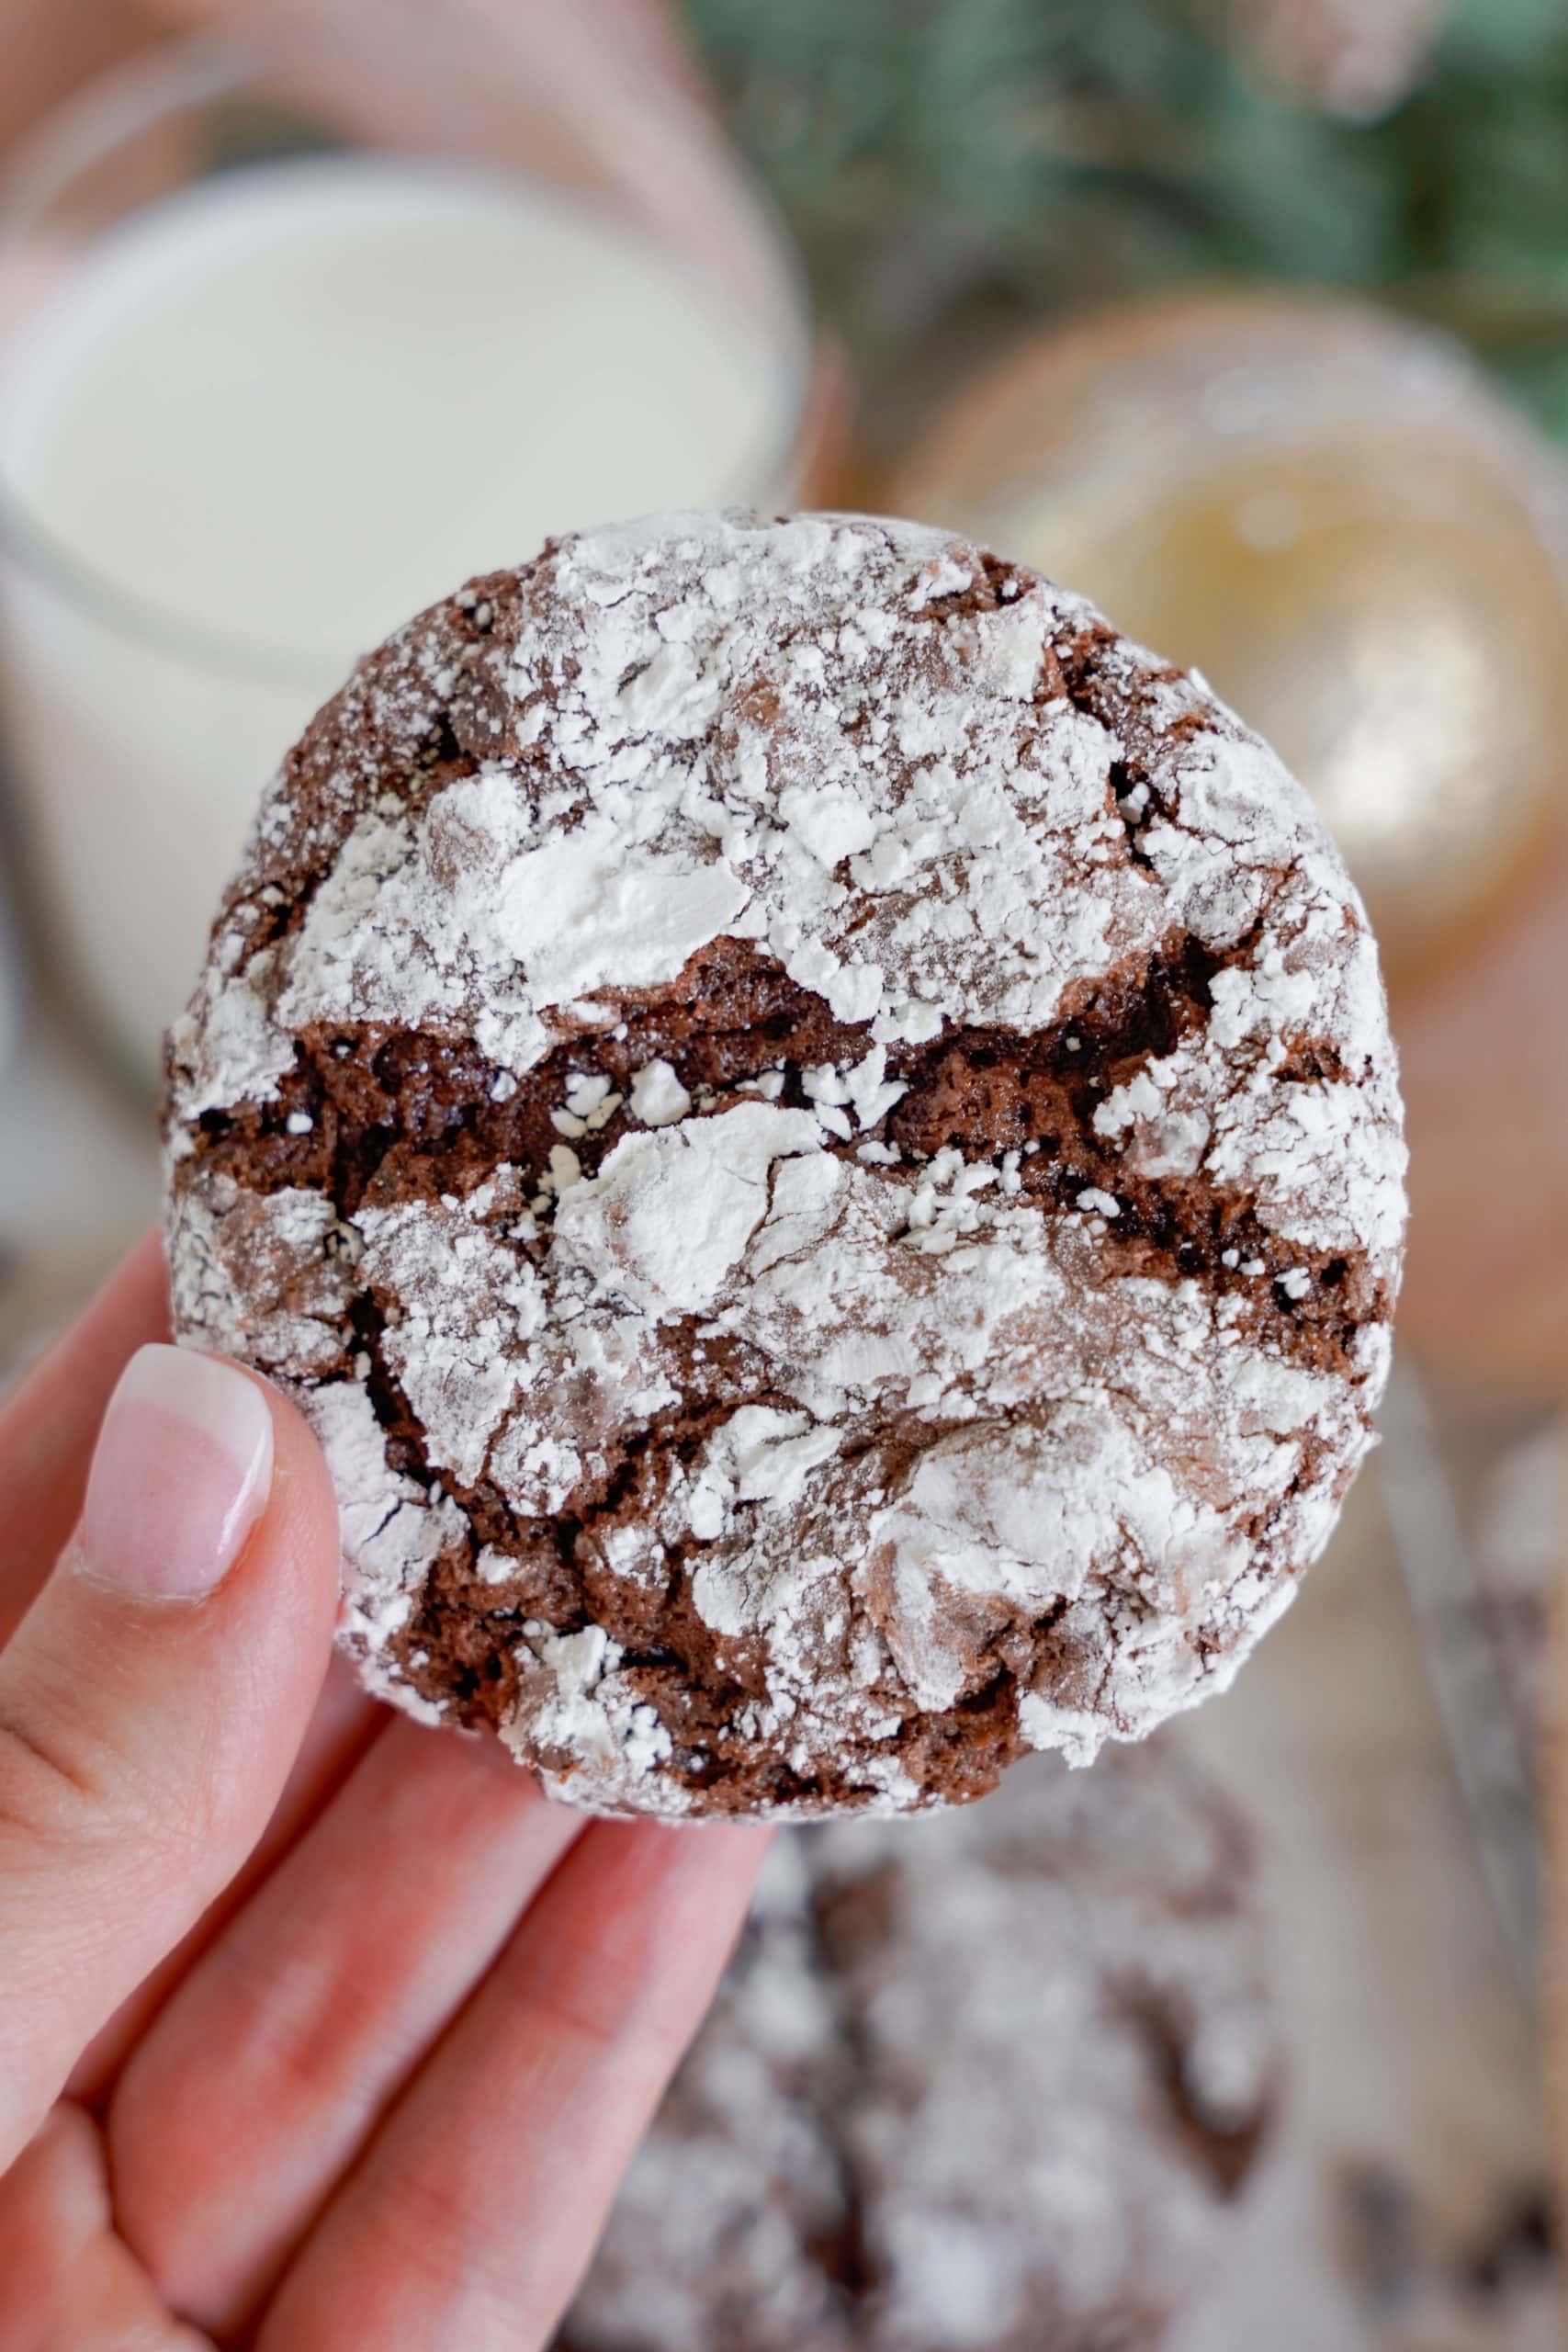 Hand holding a chocolate crinkle cookie.